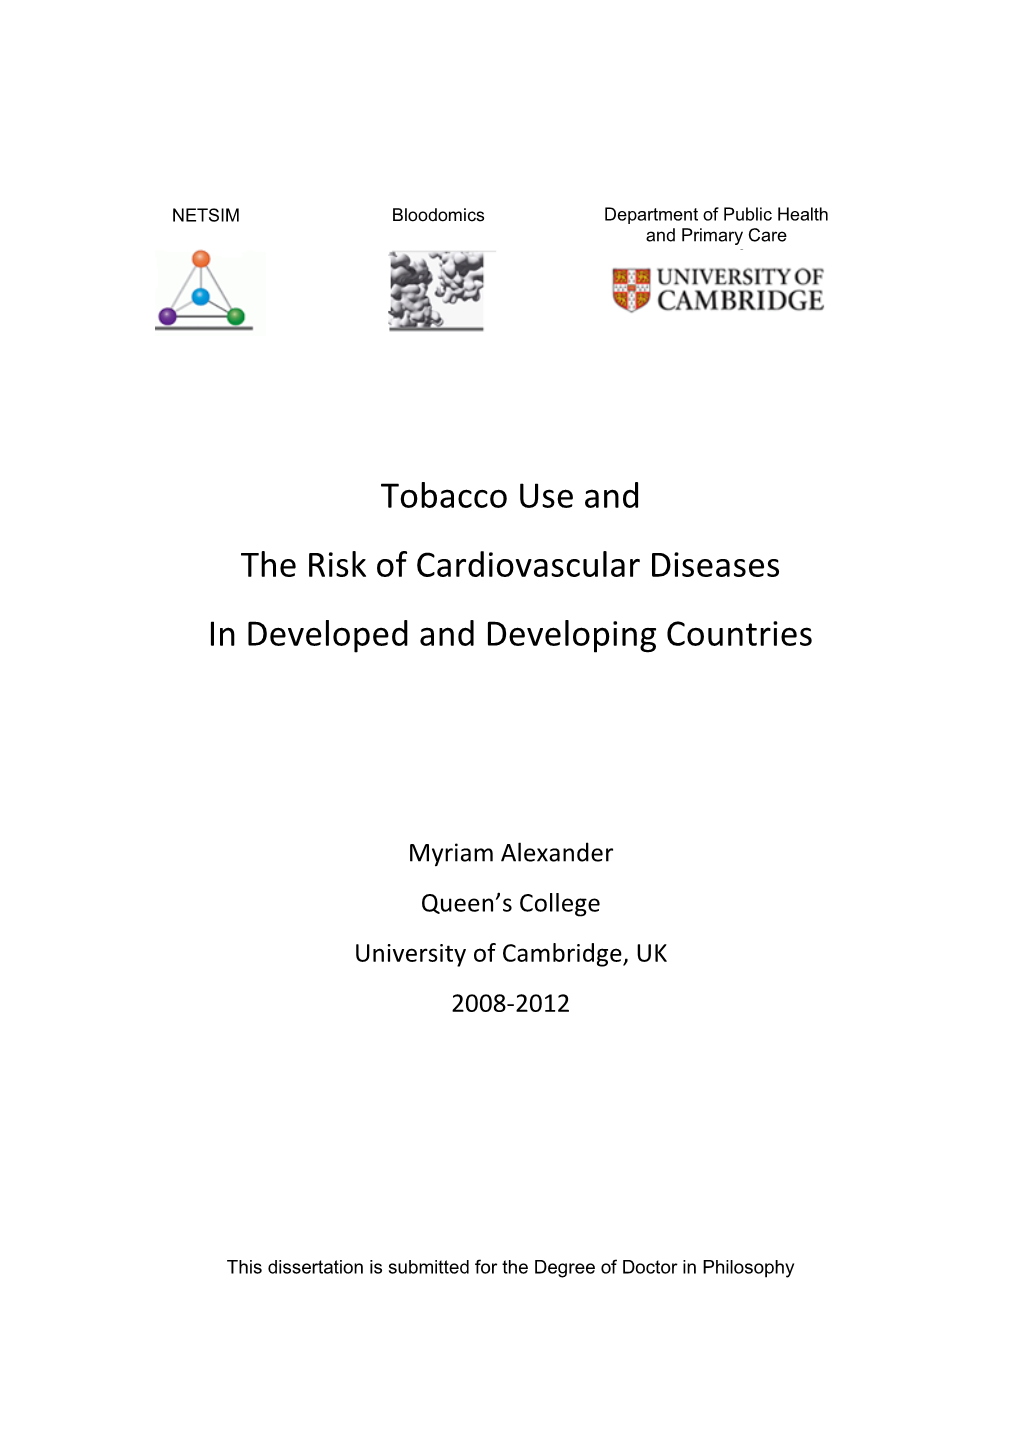 Tobacco Use and the Risk of Cardiovascular Diseases in Developed and Developing Countries